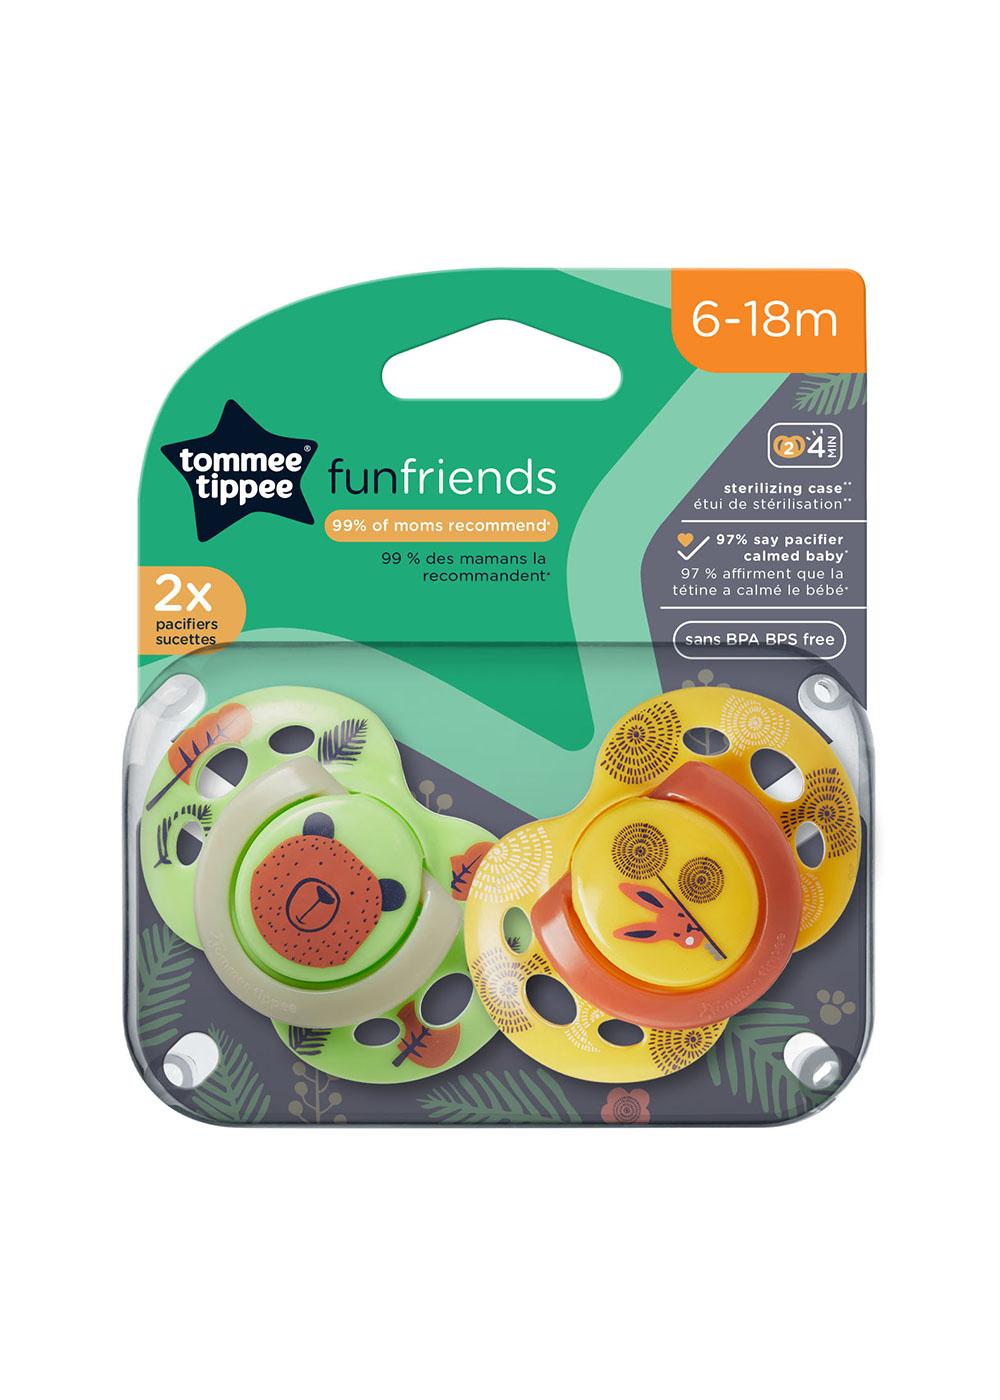 Tommee Tippee Fun Friends Pacifiers - 6-18m; image 1 of 2